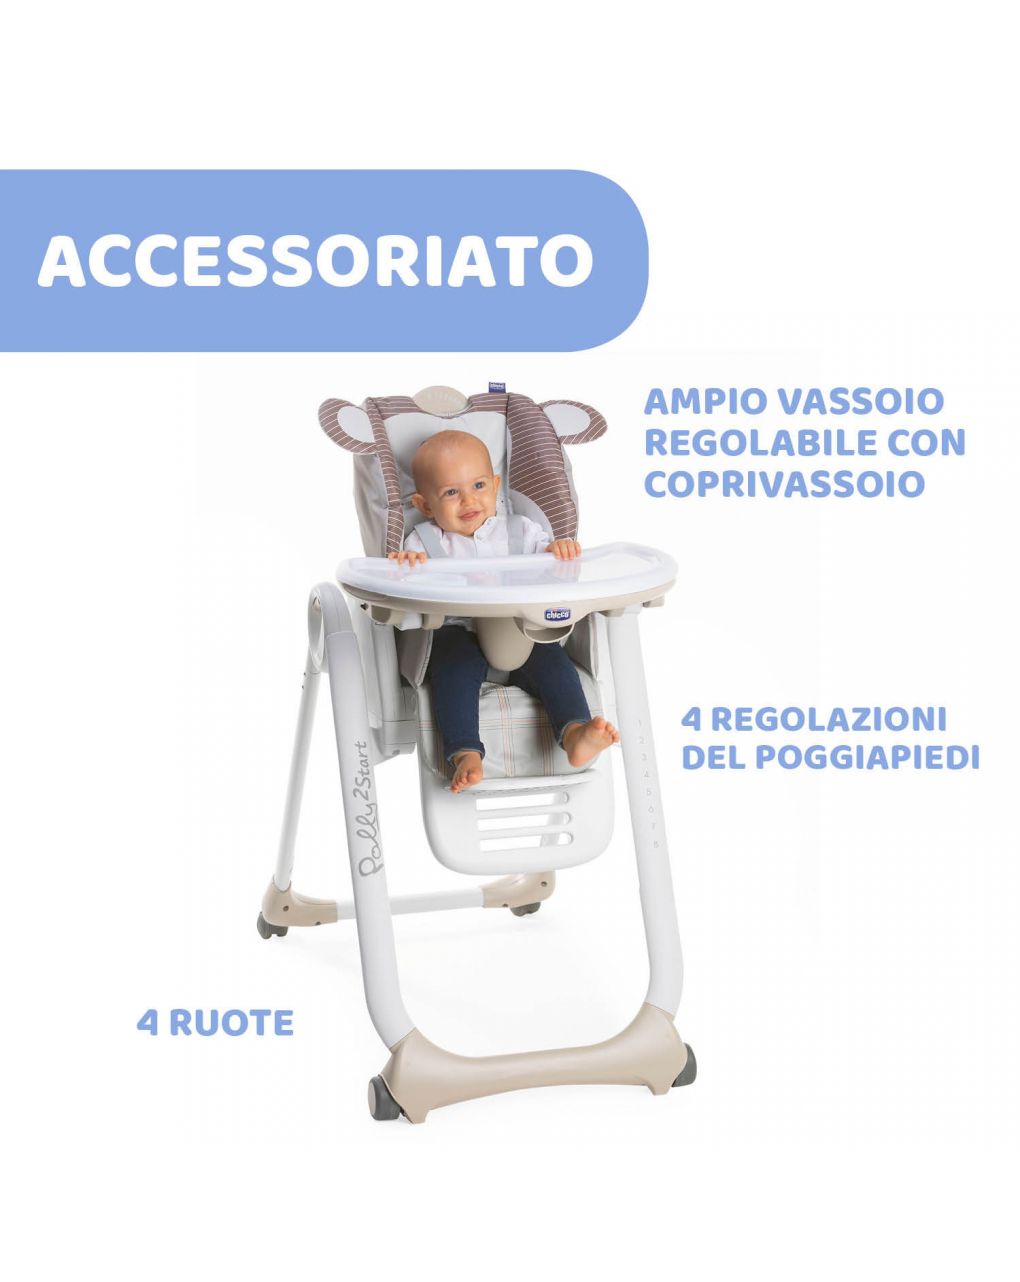 Trona polly 2 start monkey brown -4r - Chicco